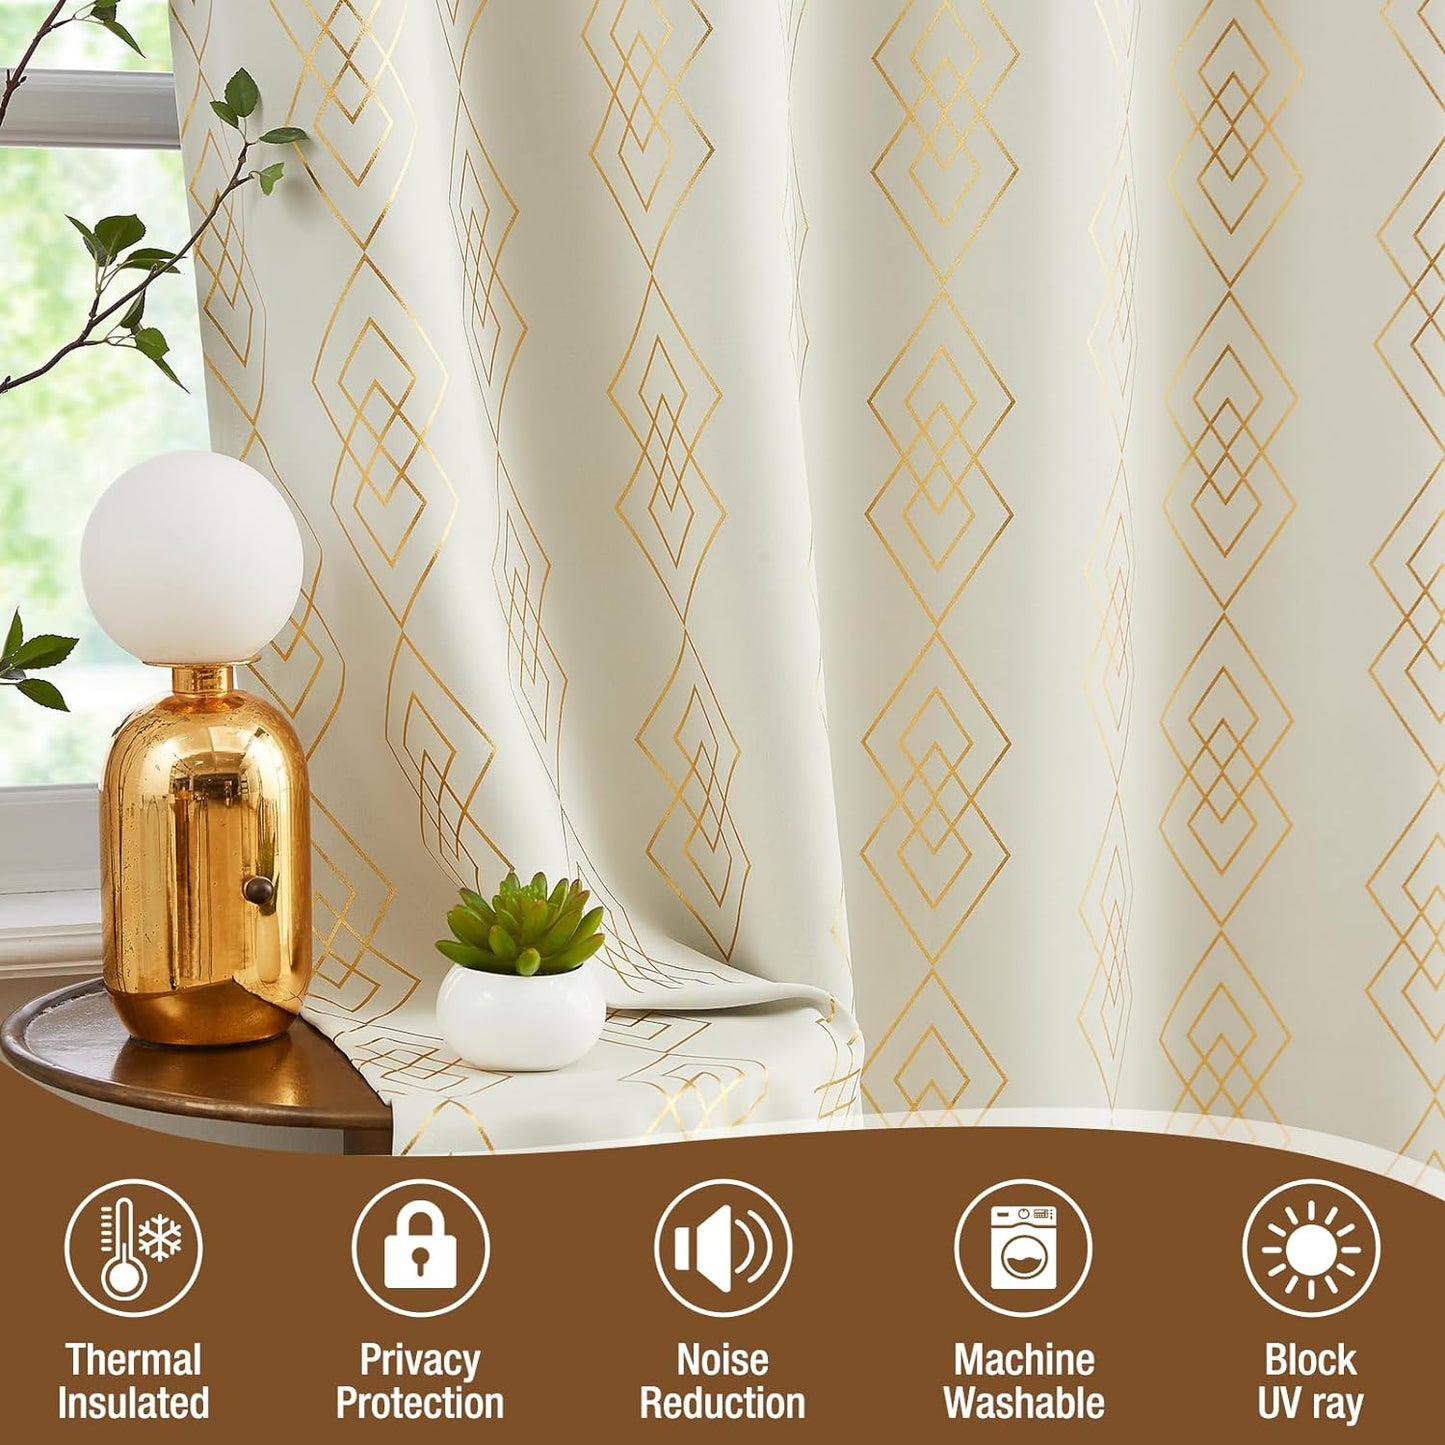 Metallic Geo Blackout Curtain Panels for Bedroom Thermal Insulated Light Blocking Foil Trellis Moroccan Window Treatments Diamond Grommet Drapes for Living-Room, Set of 2, 50" X 84", Beige/Gold  ugoutry   